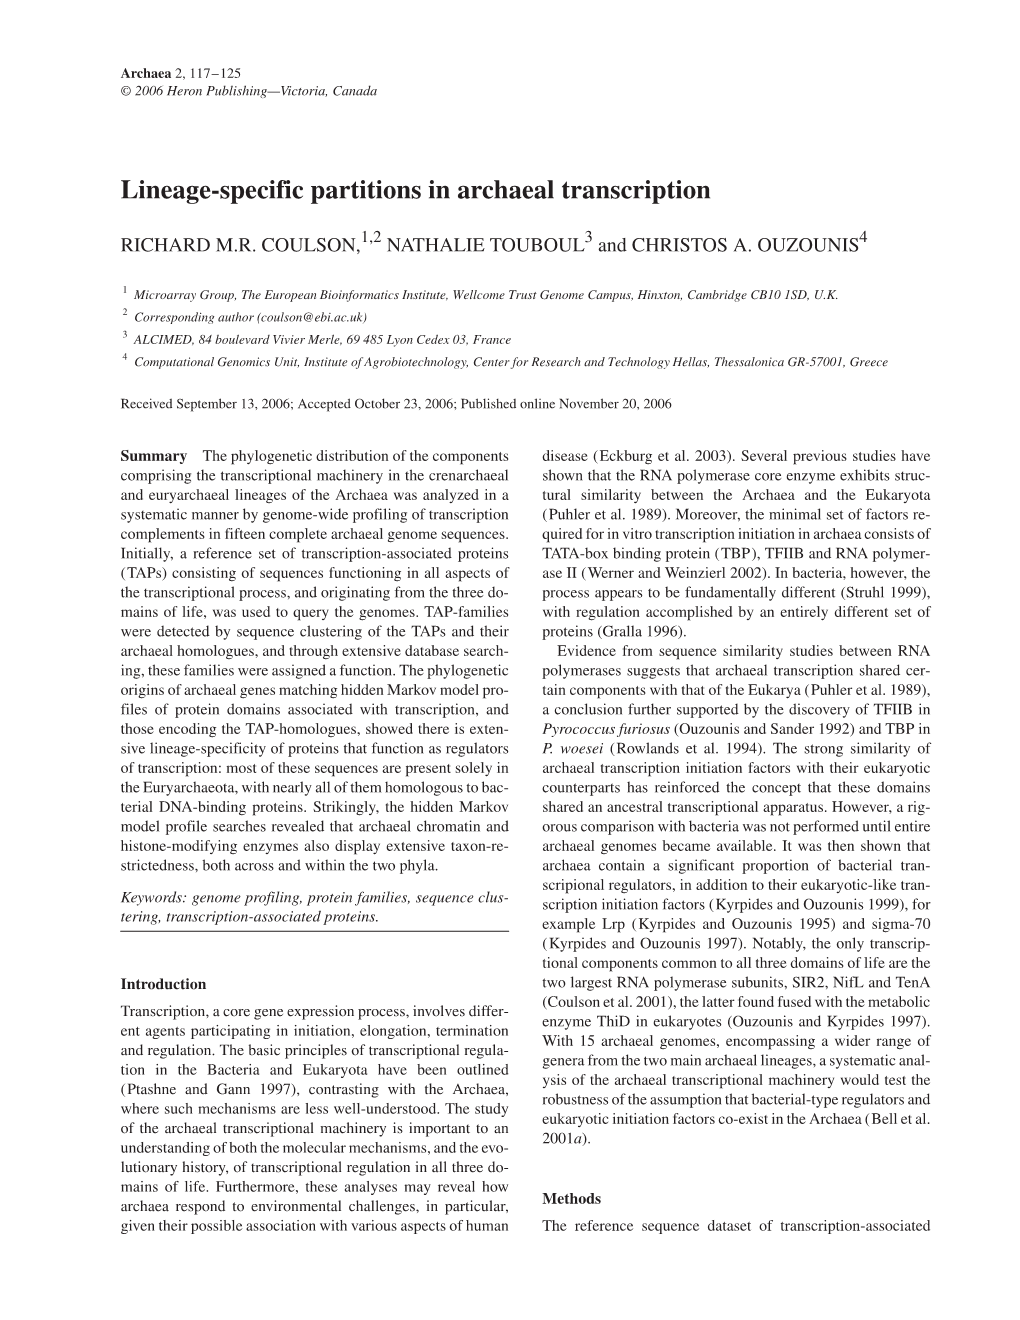 Lineage-Specific Partitions in Archaeal Transcription